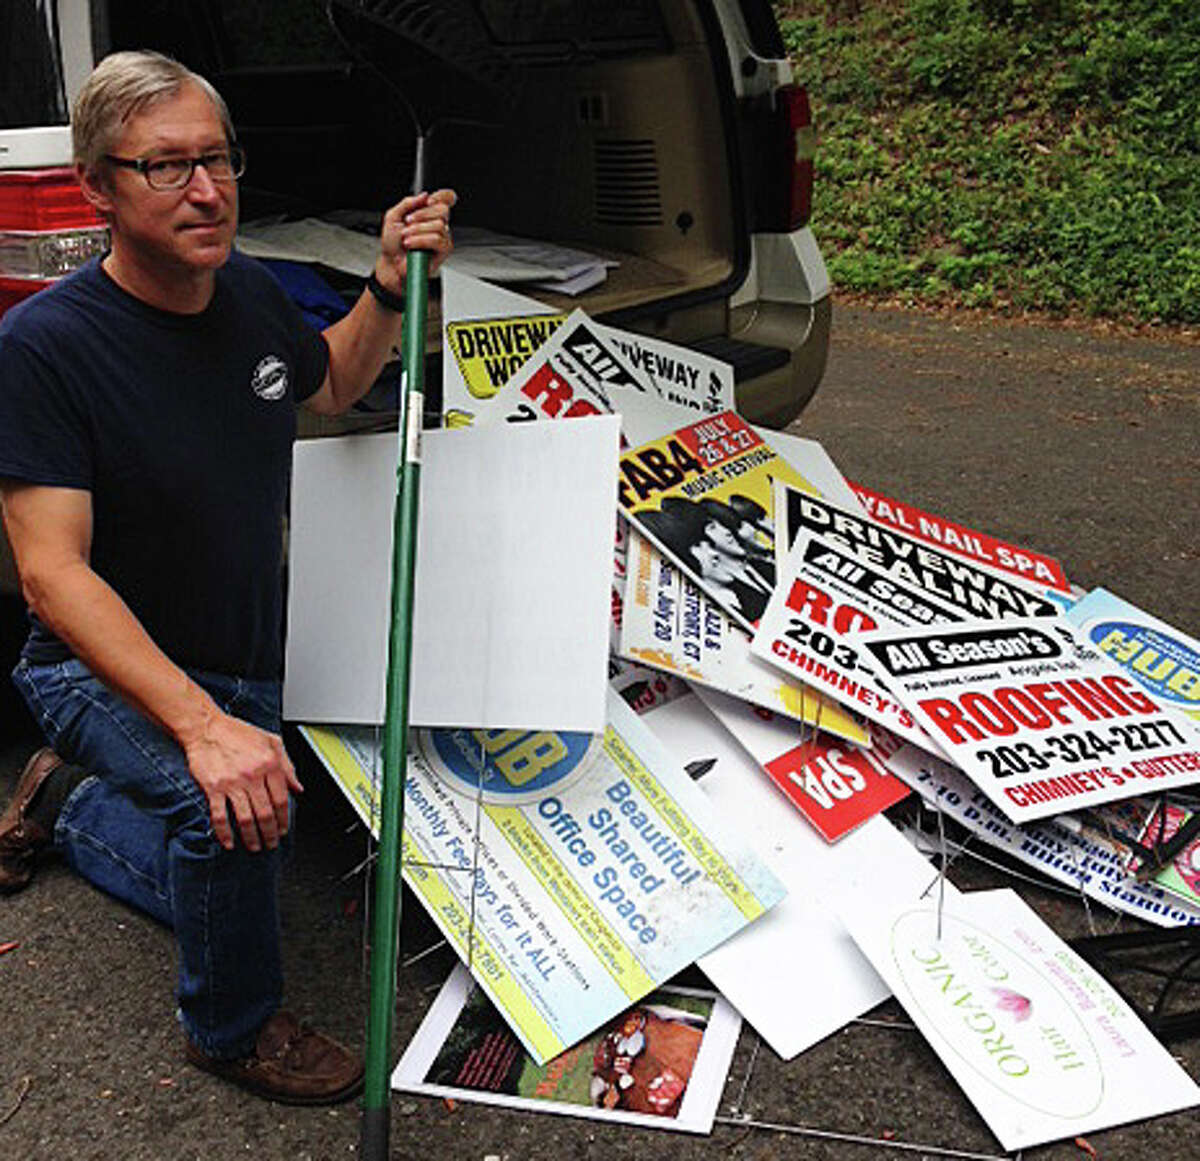 Planning and Zoning Commission member Alfred Gratix Jr., who with P&Z Chairman Chip Stephens is one of the "De-Signers," with a haul of illegally posted roadside signs the men recently took down.